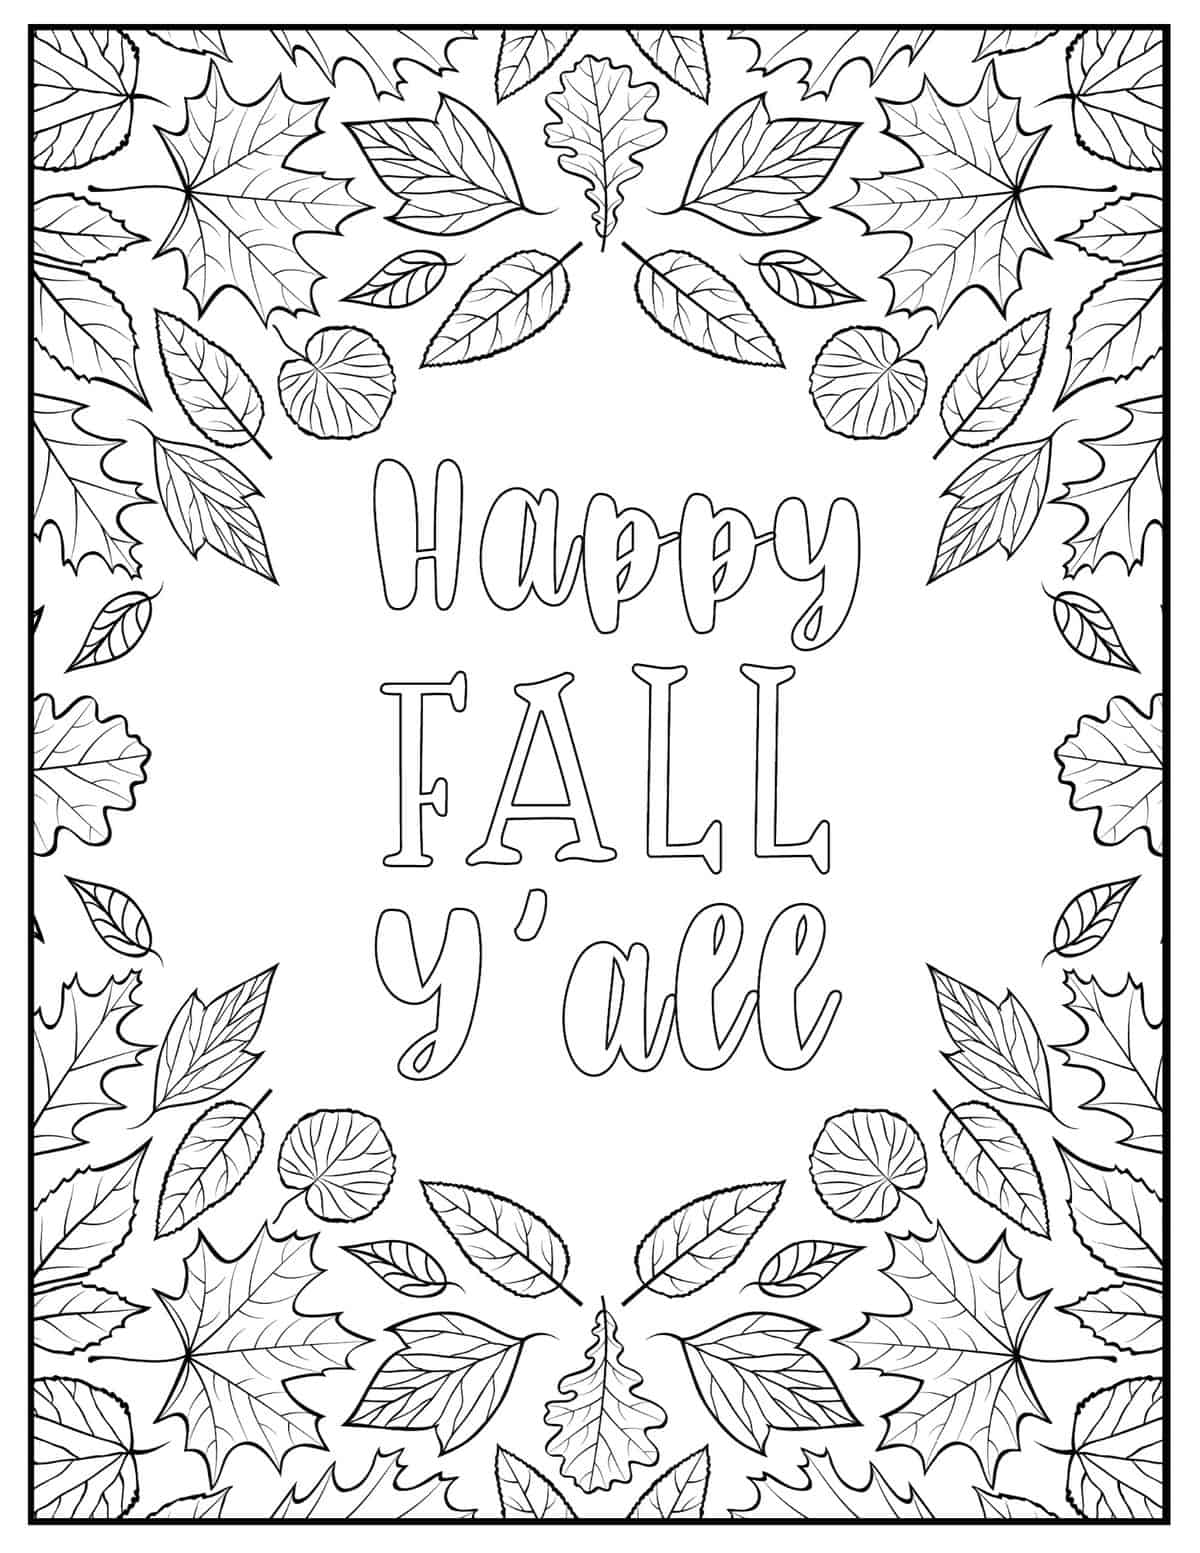 happy fall y'all coloring page with autumn leaves border